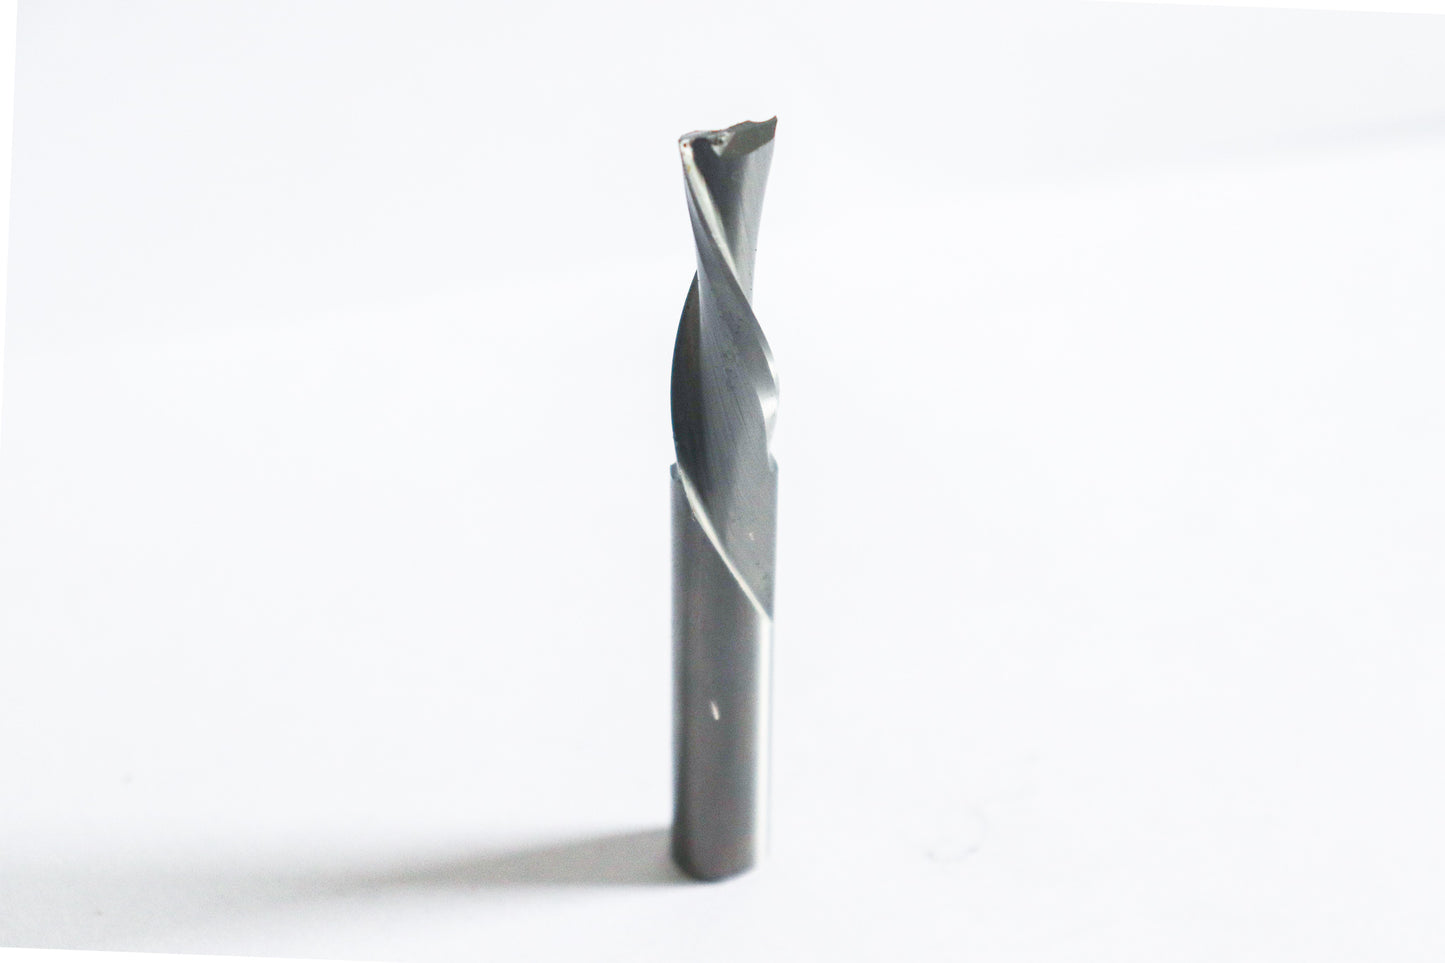 045-1232RX: 2FL Sprial Upcut; 3/8"SH; 3/8"CD; 1"CL; The RX series of bits last 50% longer than other premium CNC bits.